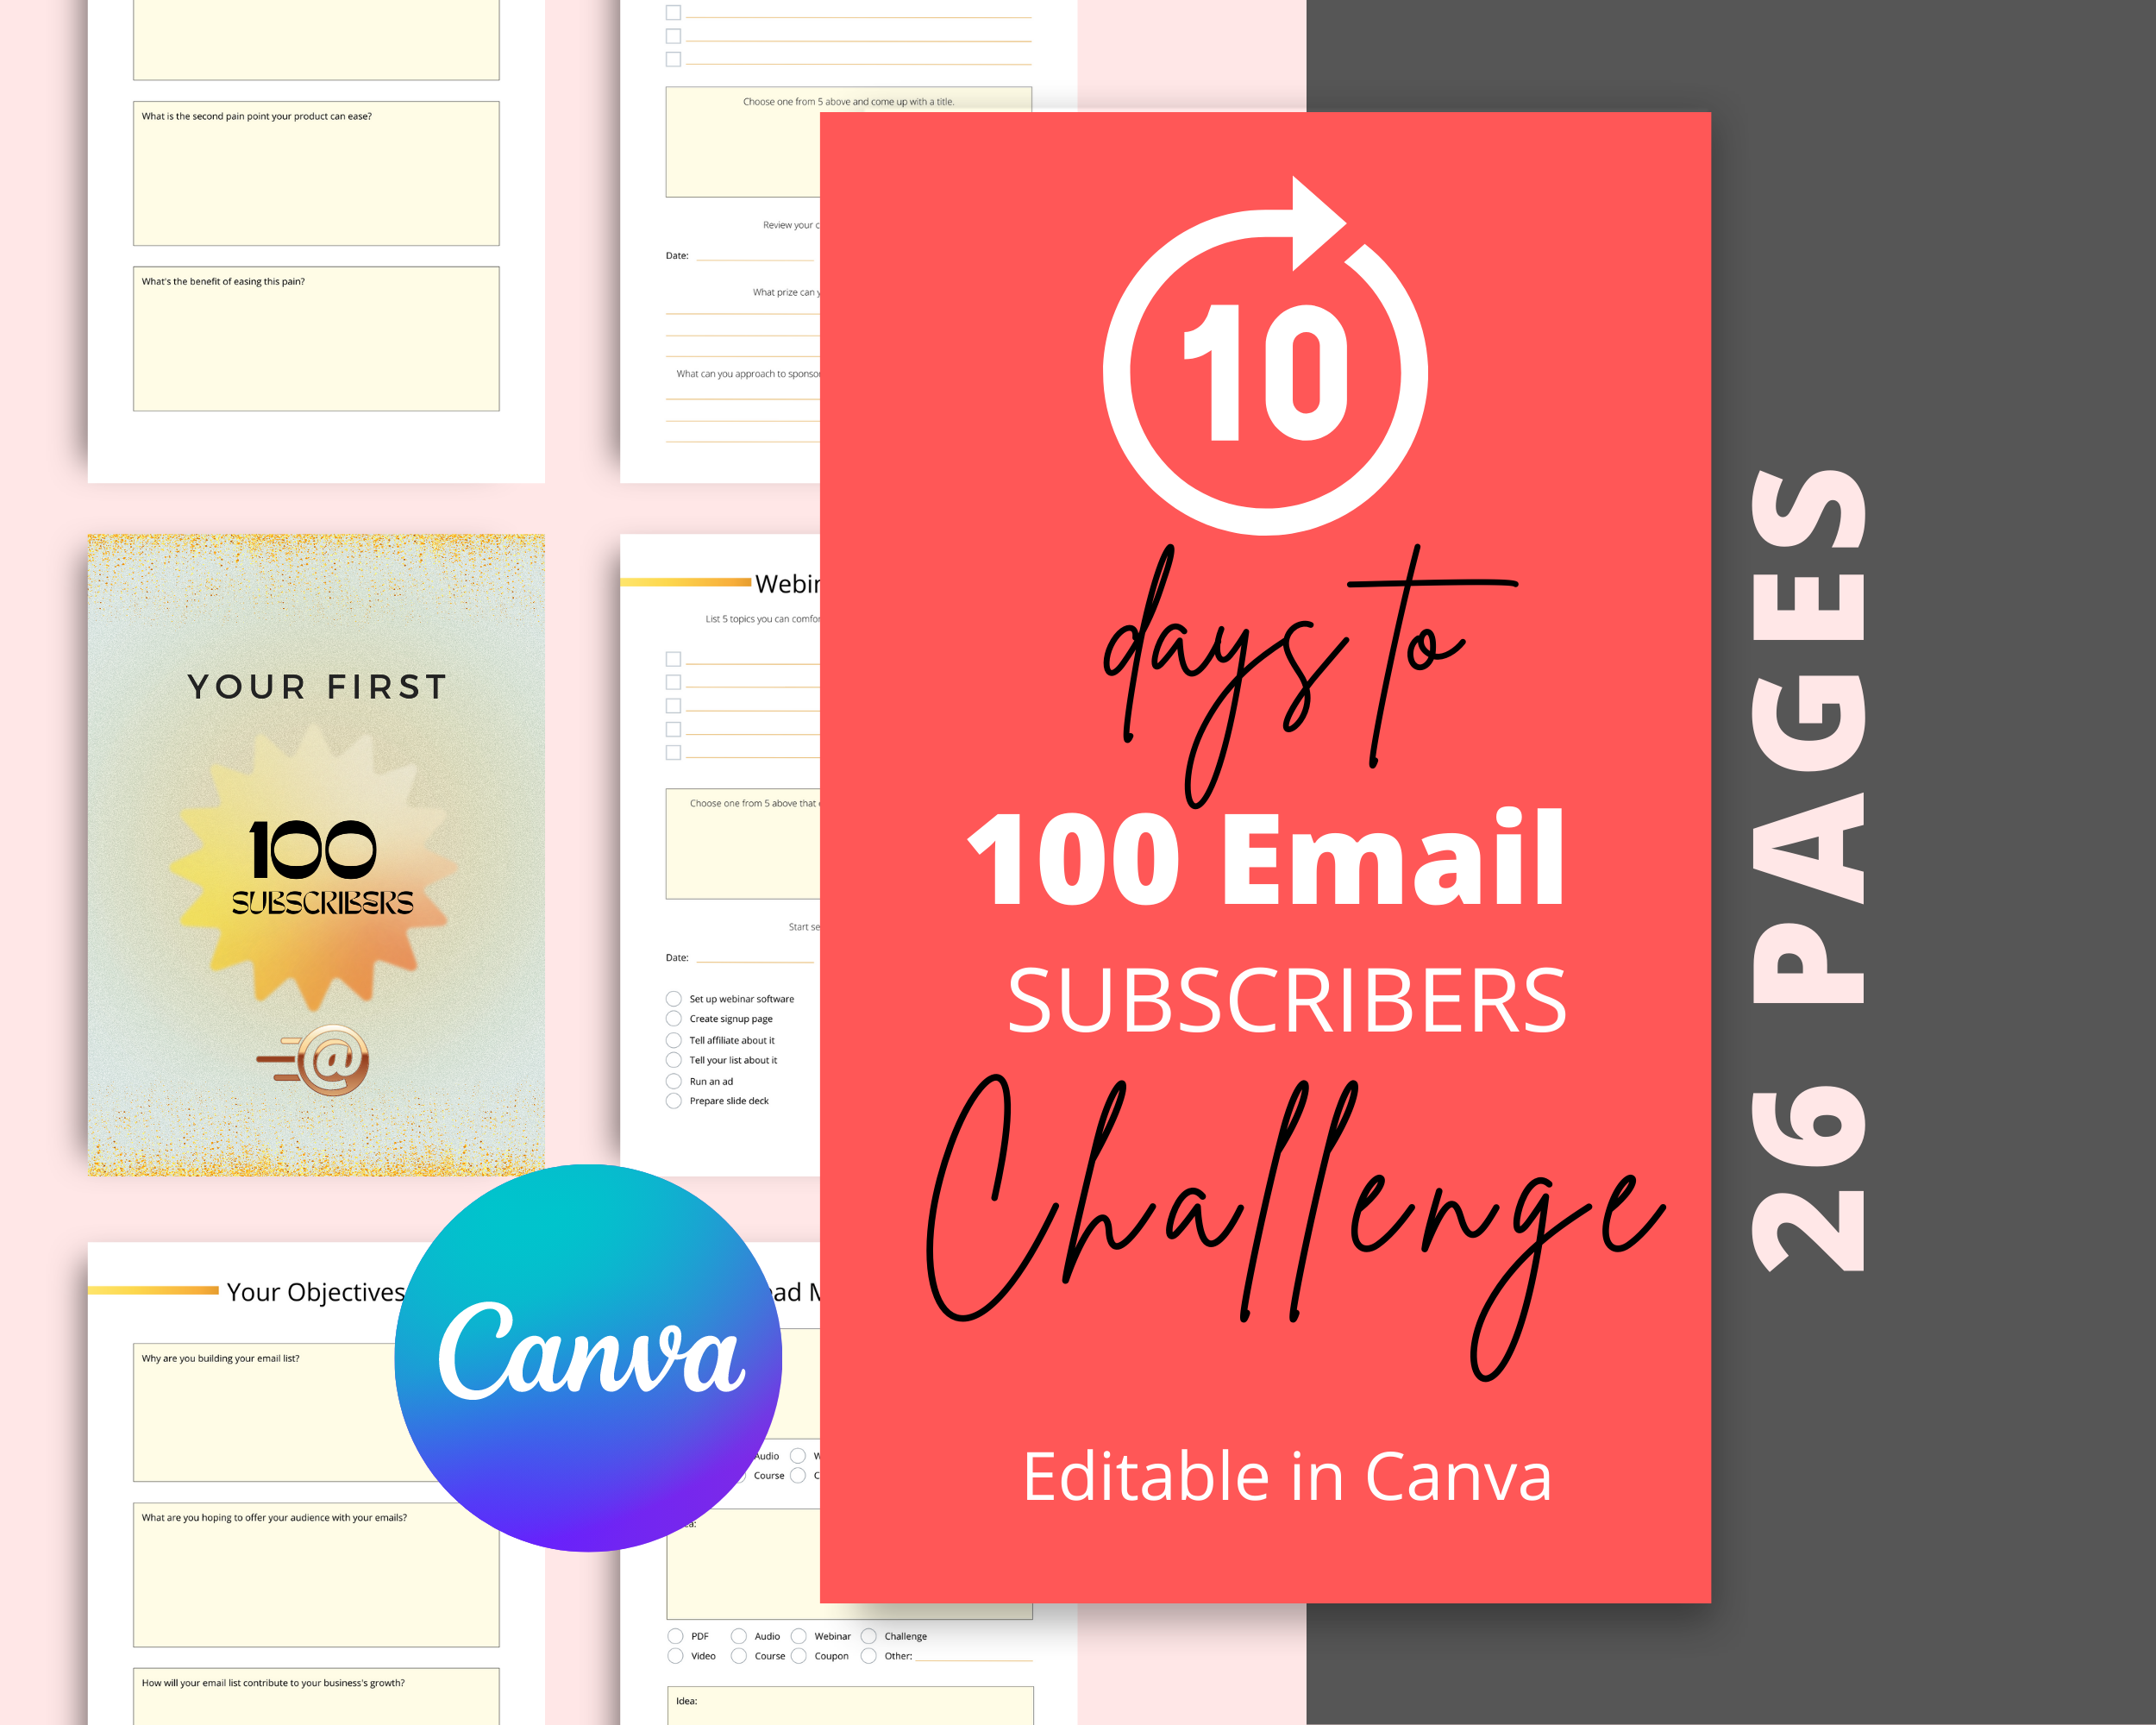 10 Days To Your First 100 Email Subscribers Challenge